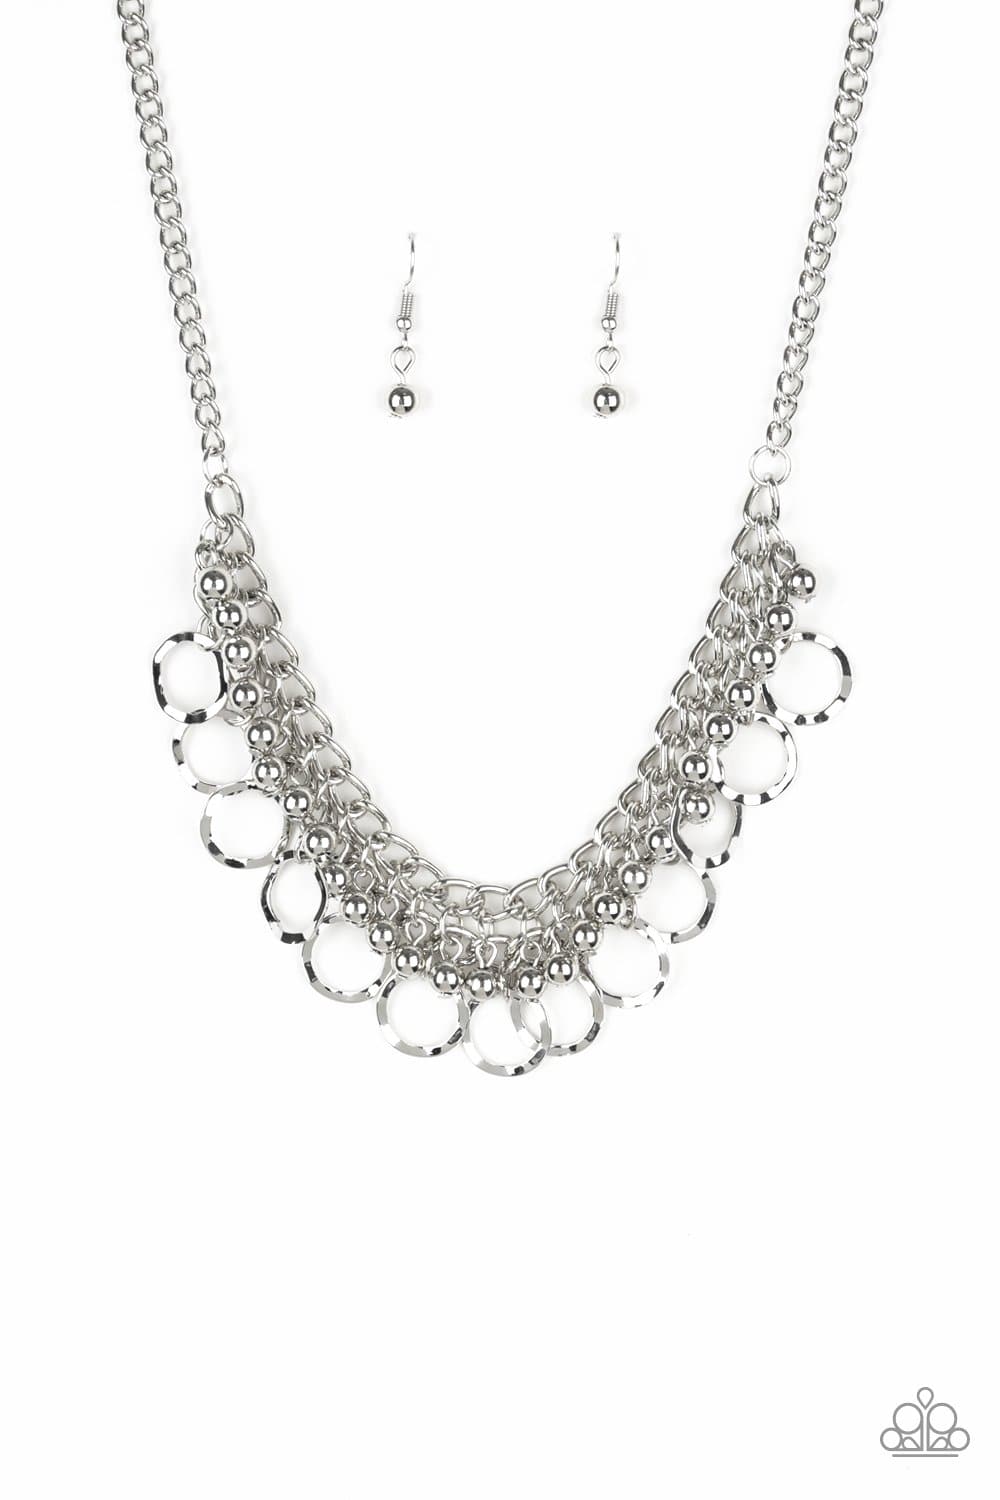 A190 - Ring Leader Radiance Necklace by Paparazzi Accessories on Fancy5Fashion.com